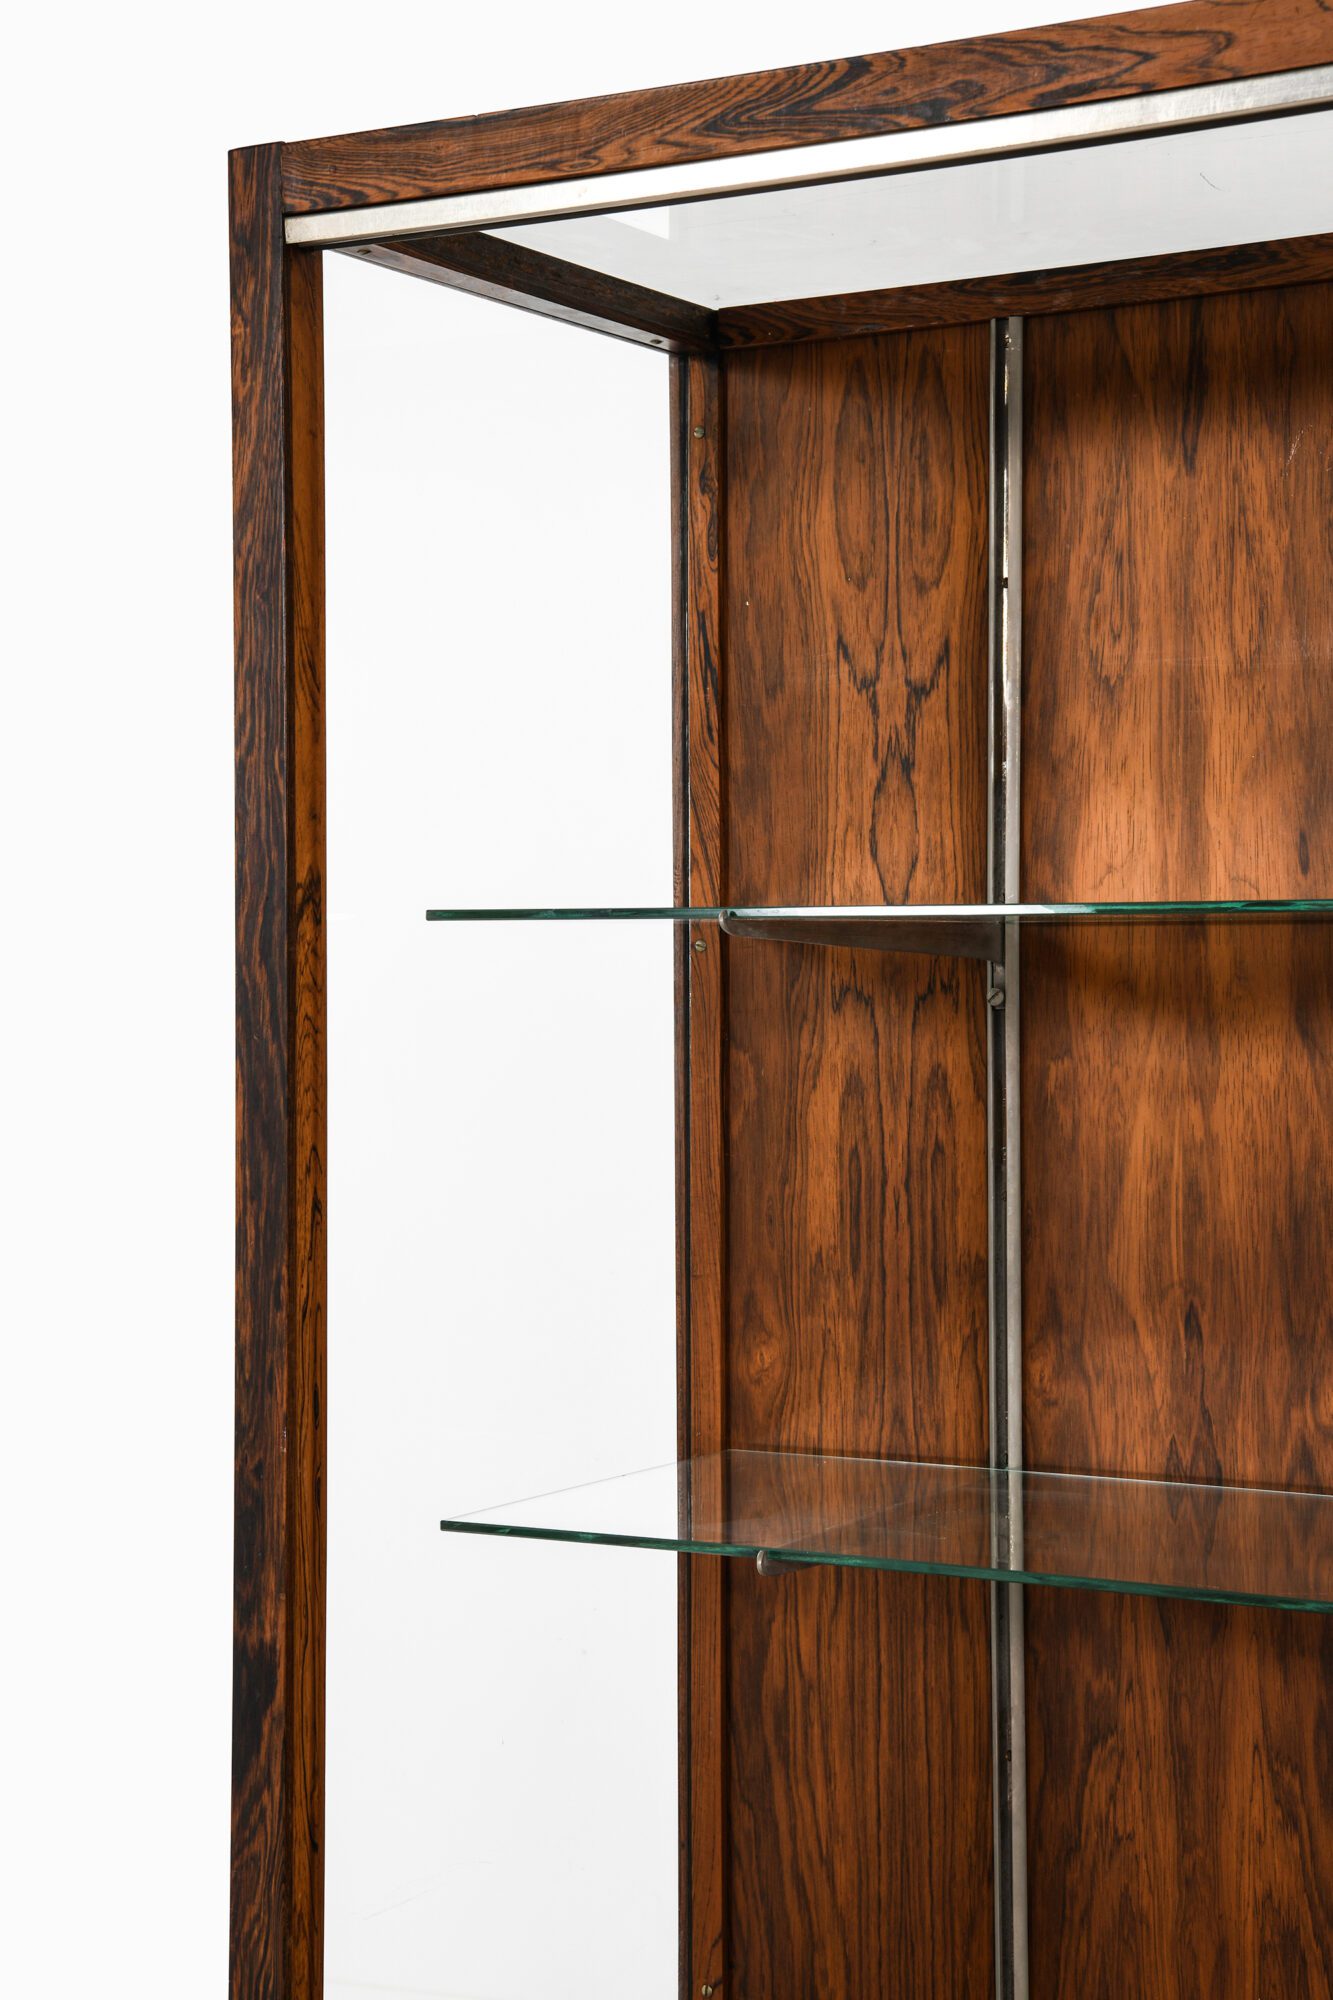 Display cabinet in rosewood, steel and glass at Studio Schalling